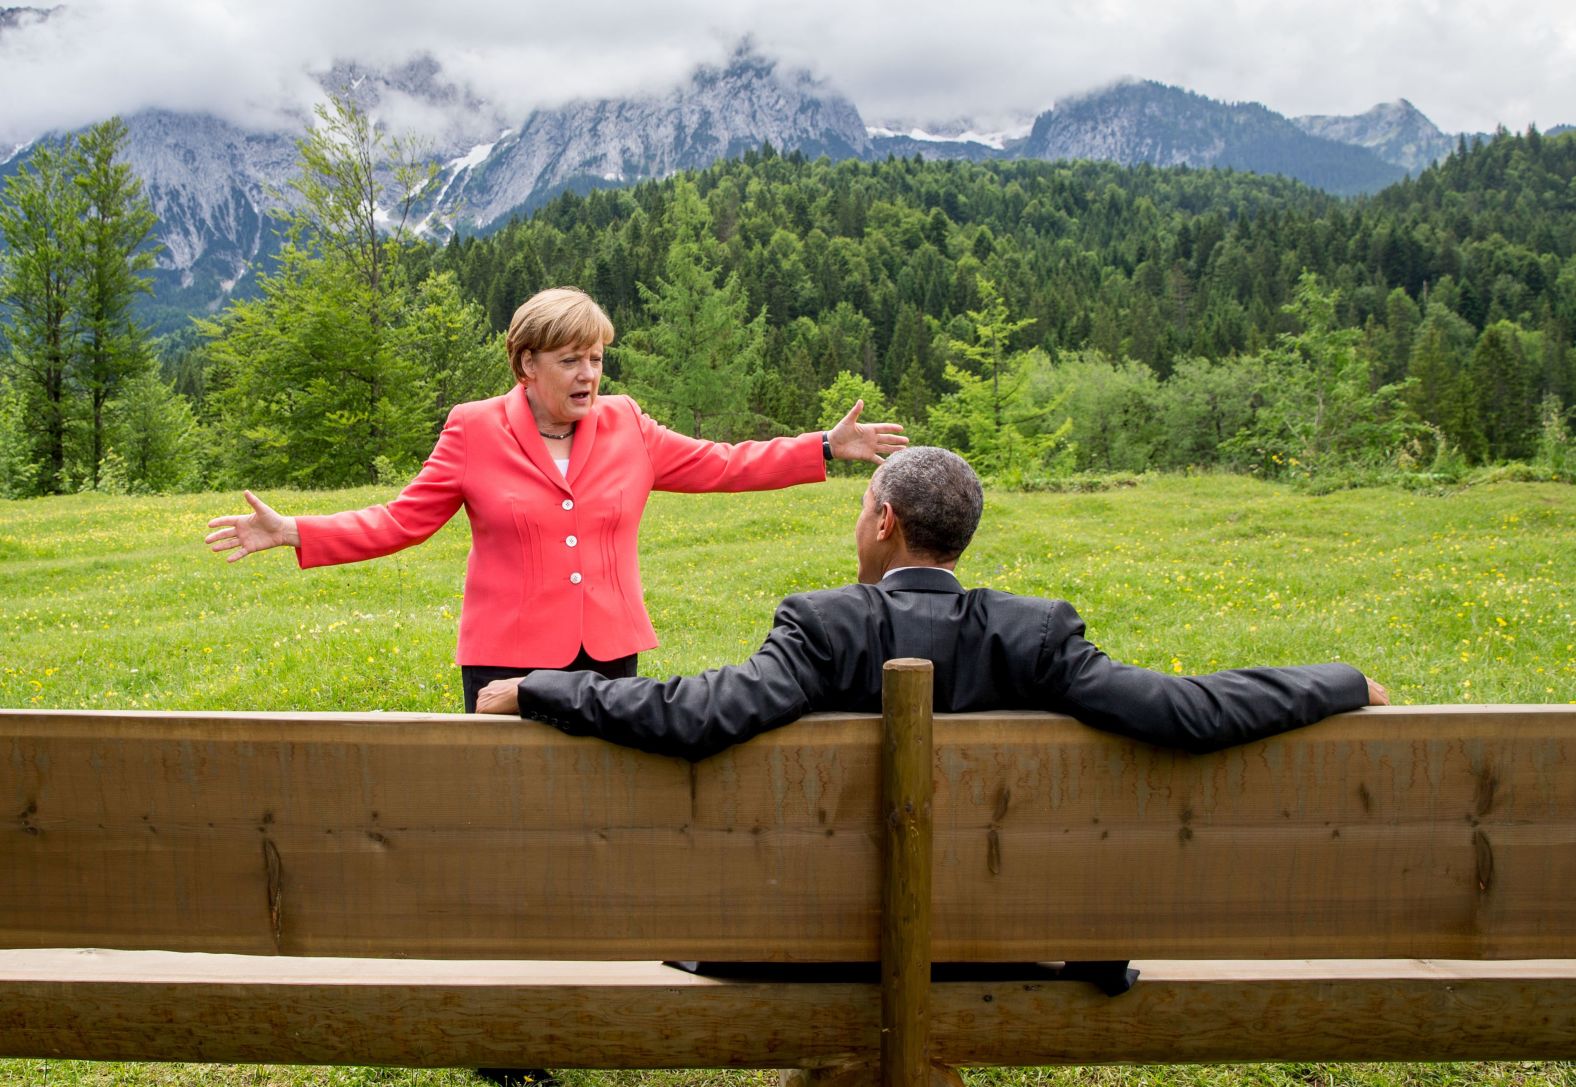 German Chancellor Angela Merkel <a href="http://www.cnn.com/2015/06/08/politics/barack-obama-angela-merkel-photo-germany-mountains/" target="_blank">talks with US President Barack Obama</a> near the Bavarian Alps in June 2015. Obama and other world leaders were in Germany for the annual G7 summit.